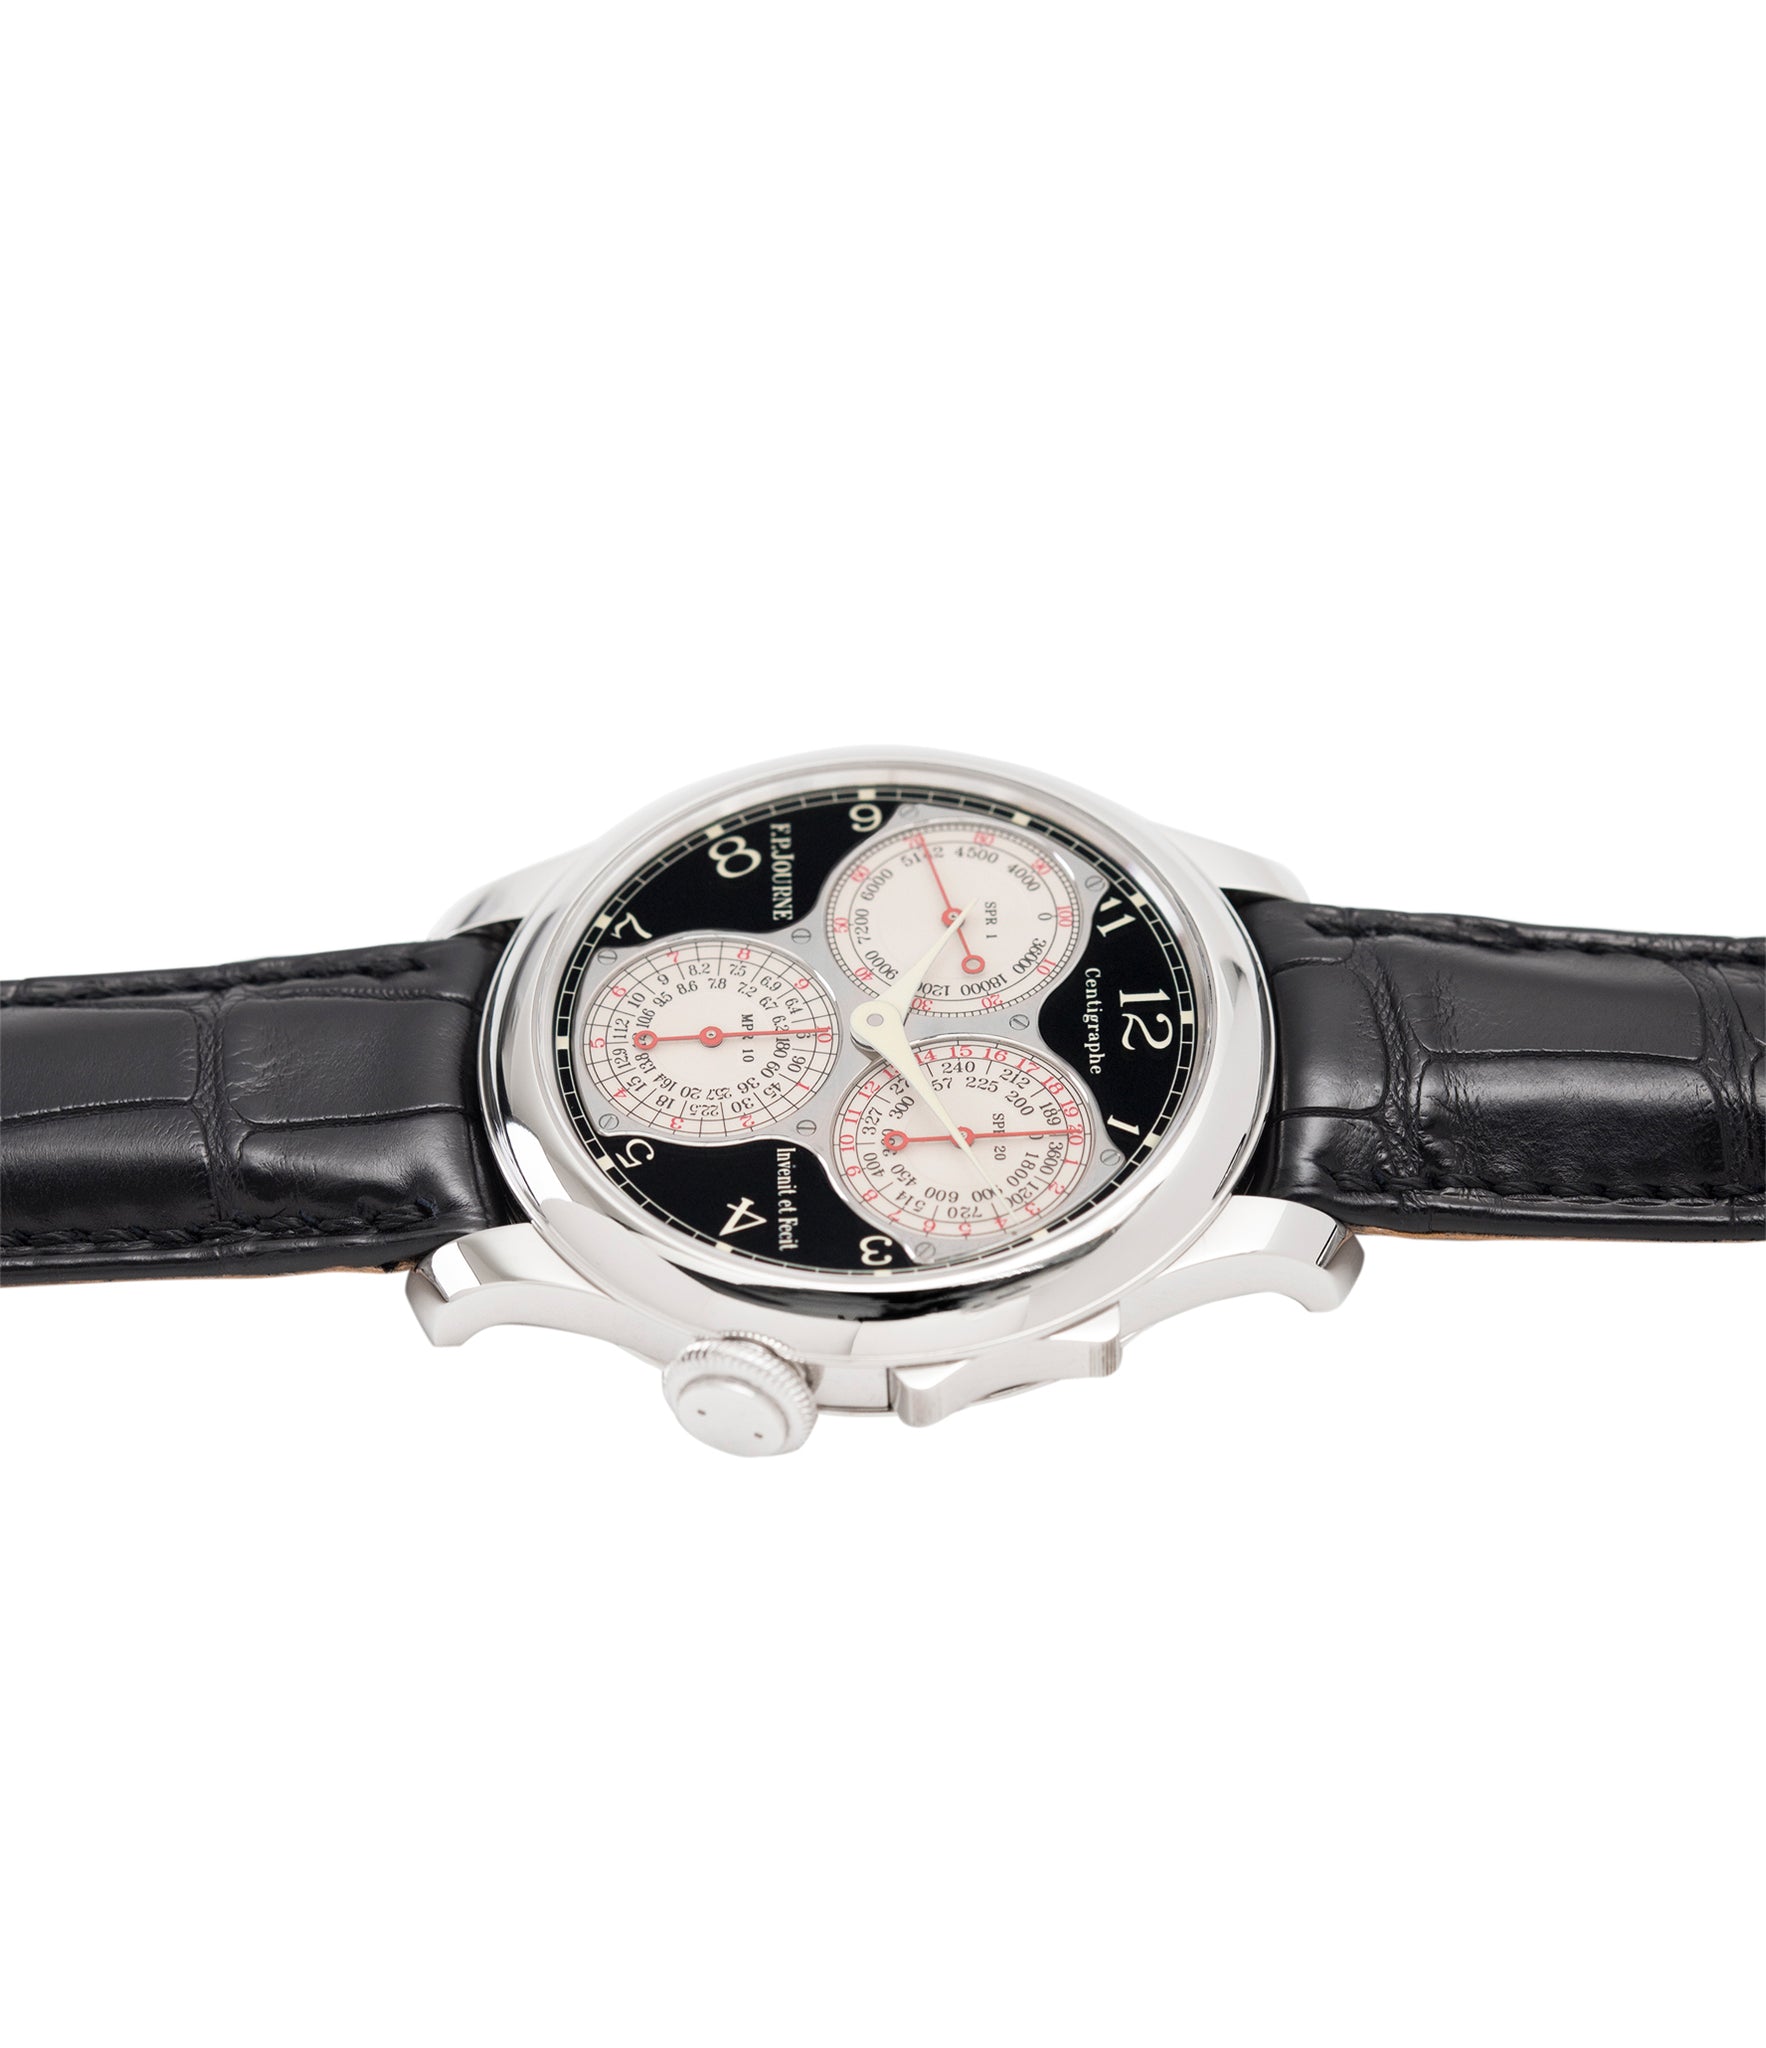 shop preowned F. P. Journe Centigraphe Souverain Black Label 40 mm pre-owned rare watch for sale online at A Collected Man London approved retailer of independent watchmakers